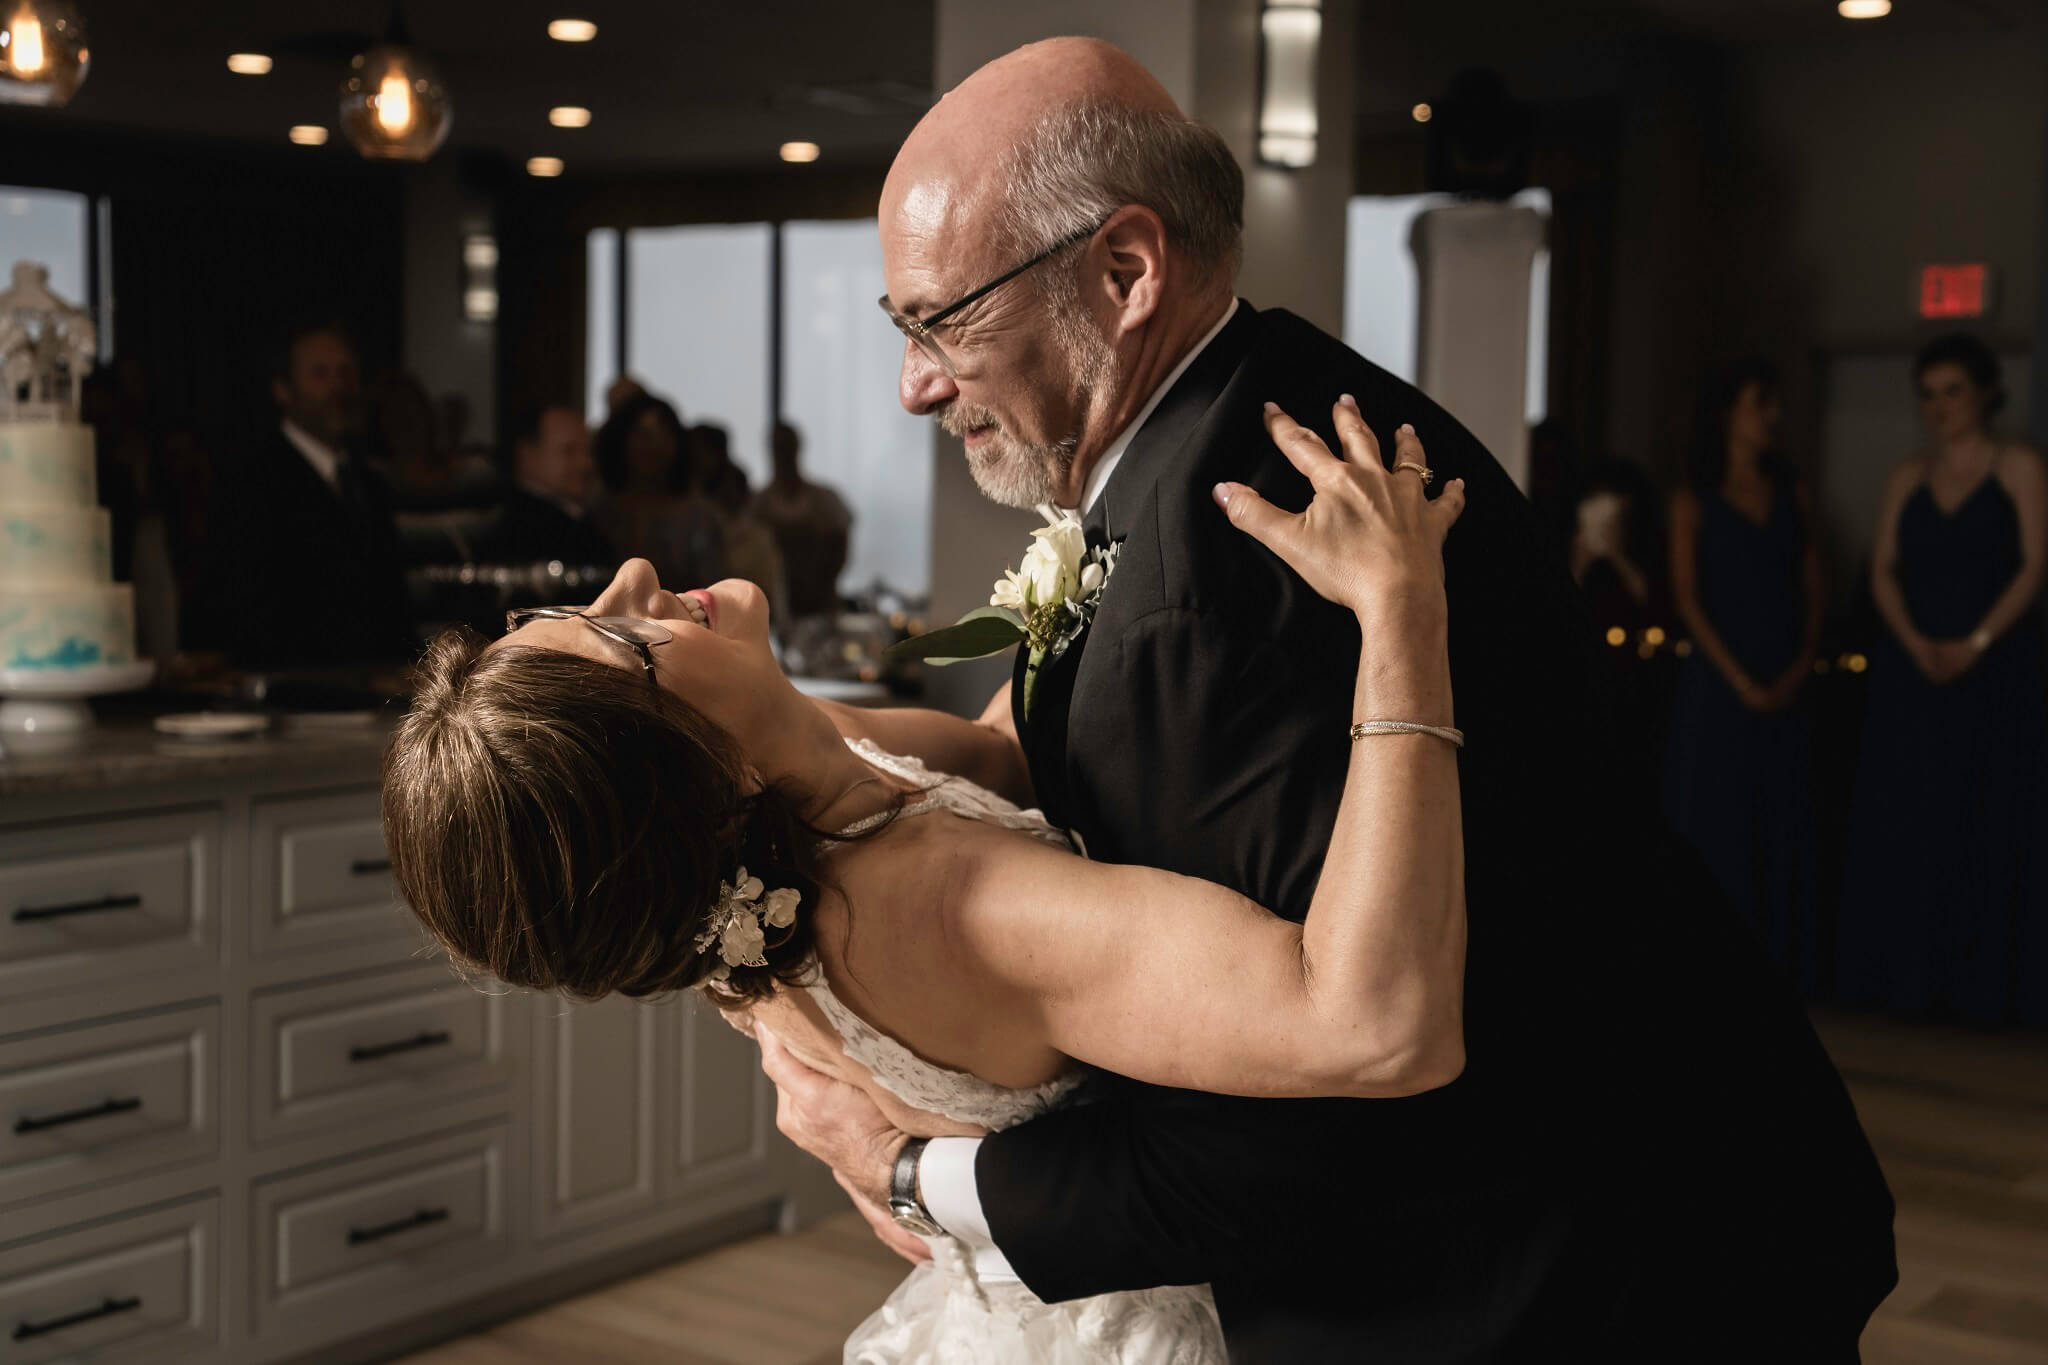 father and daughter dancing at wedding